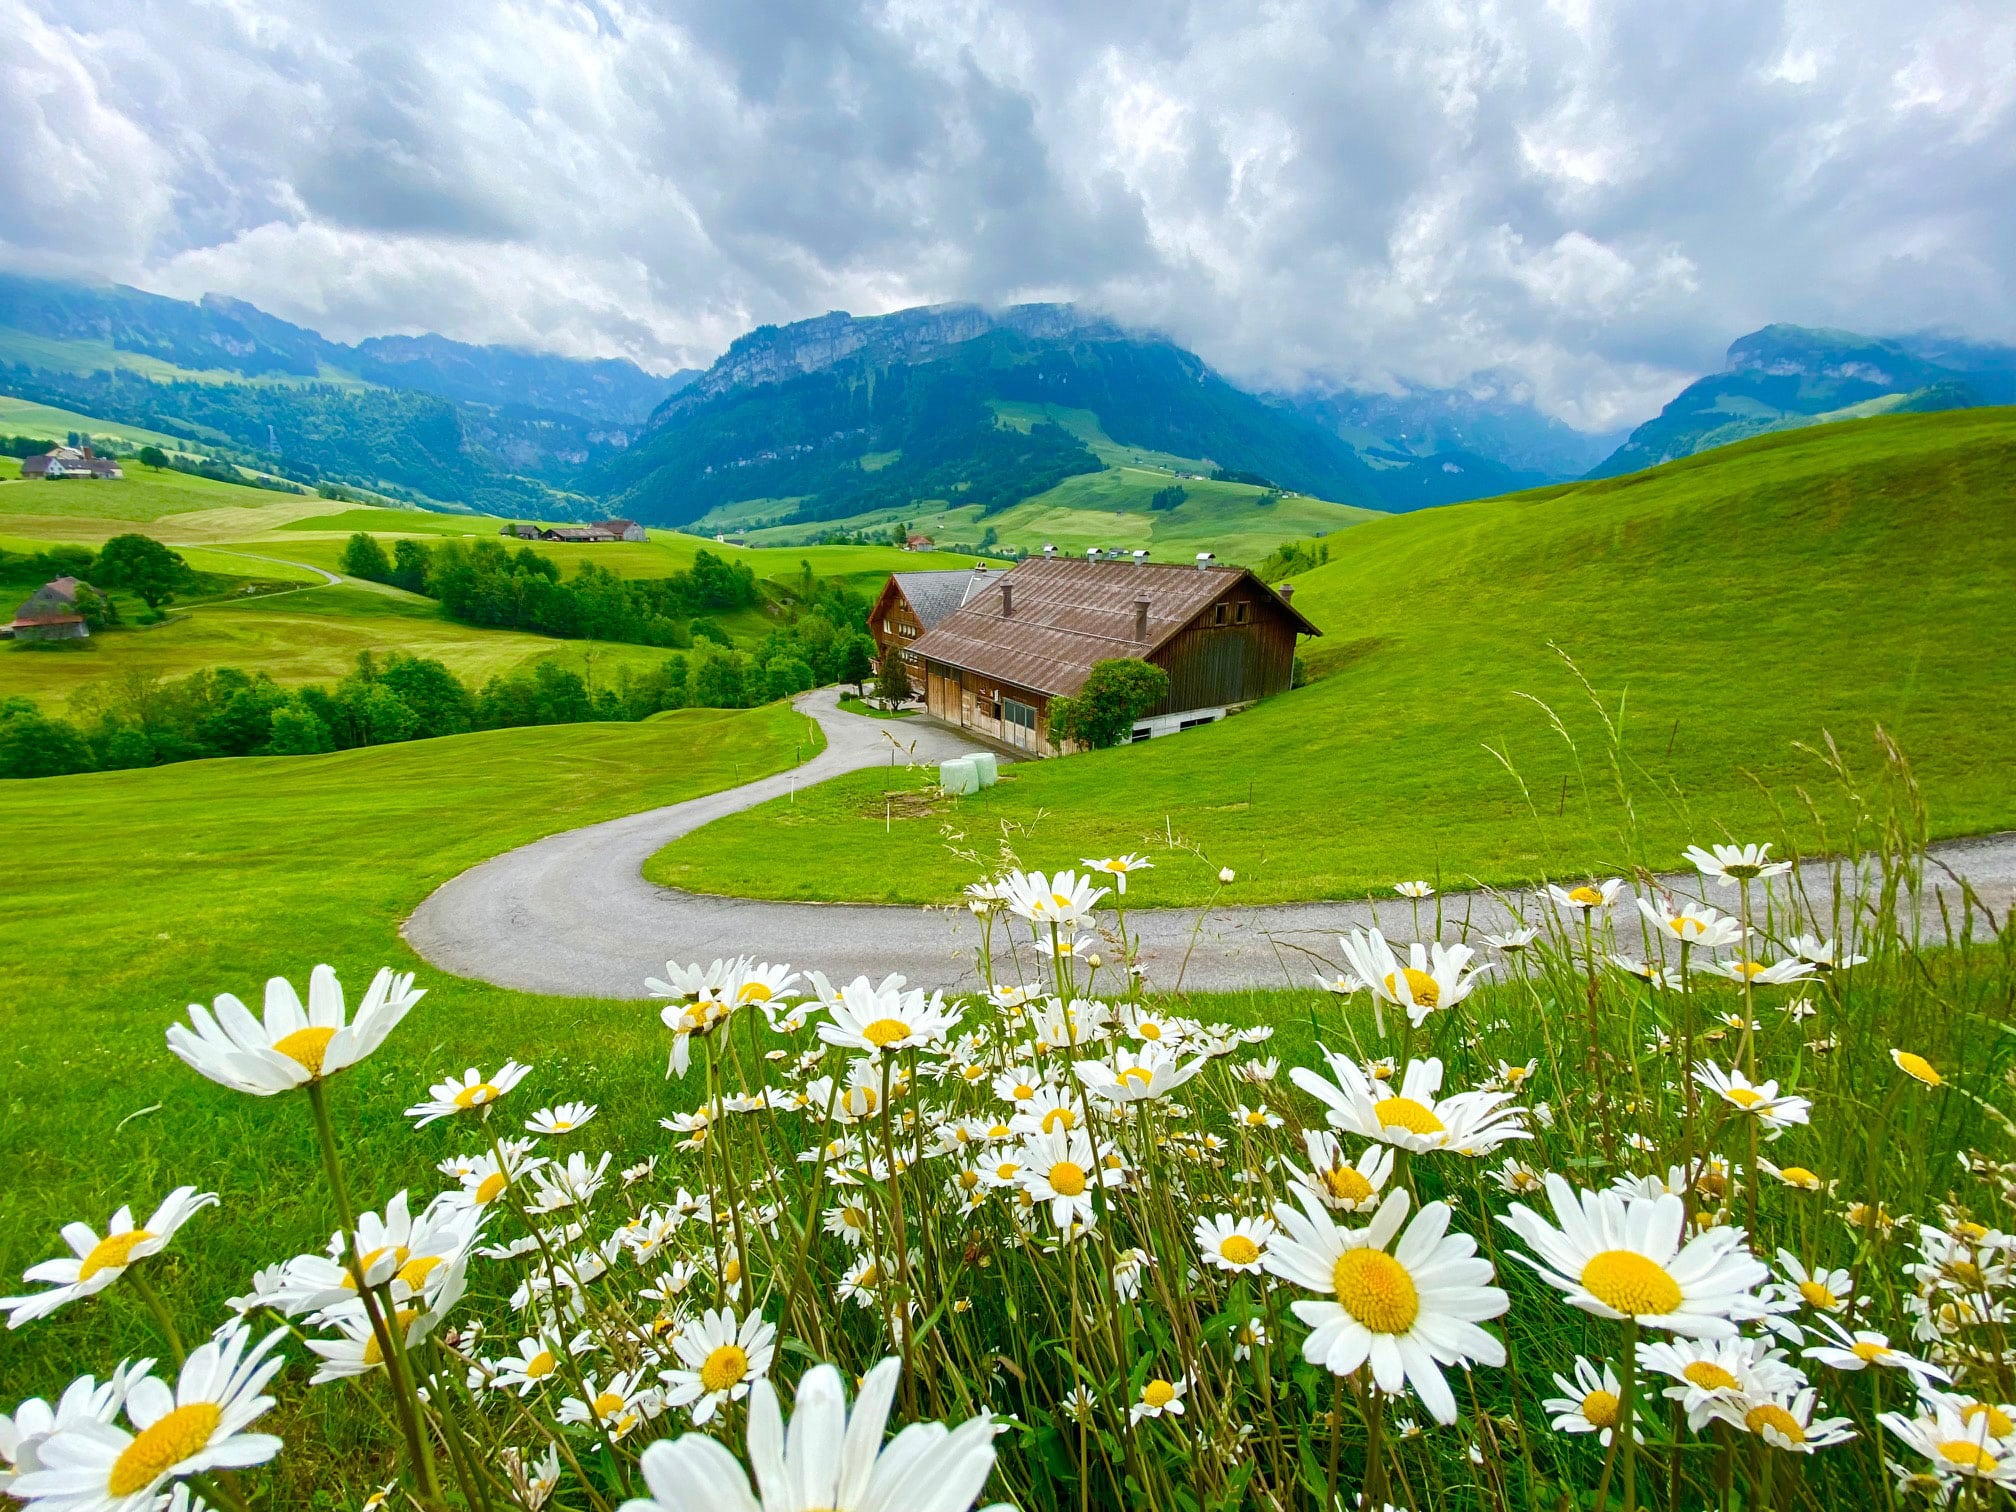 Swiss Farm Experience, Appenzell & Rhine Falls Day Tour (from Lucerne)